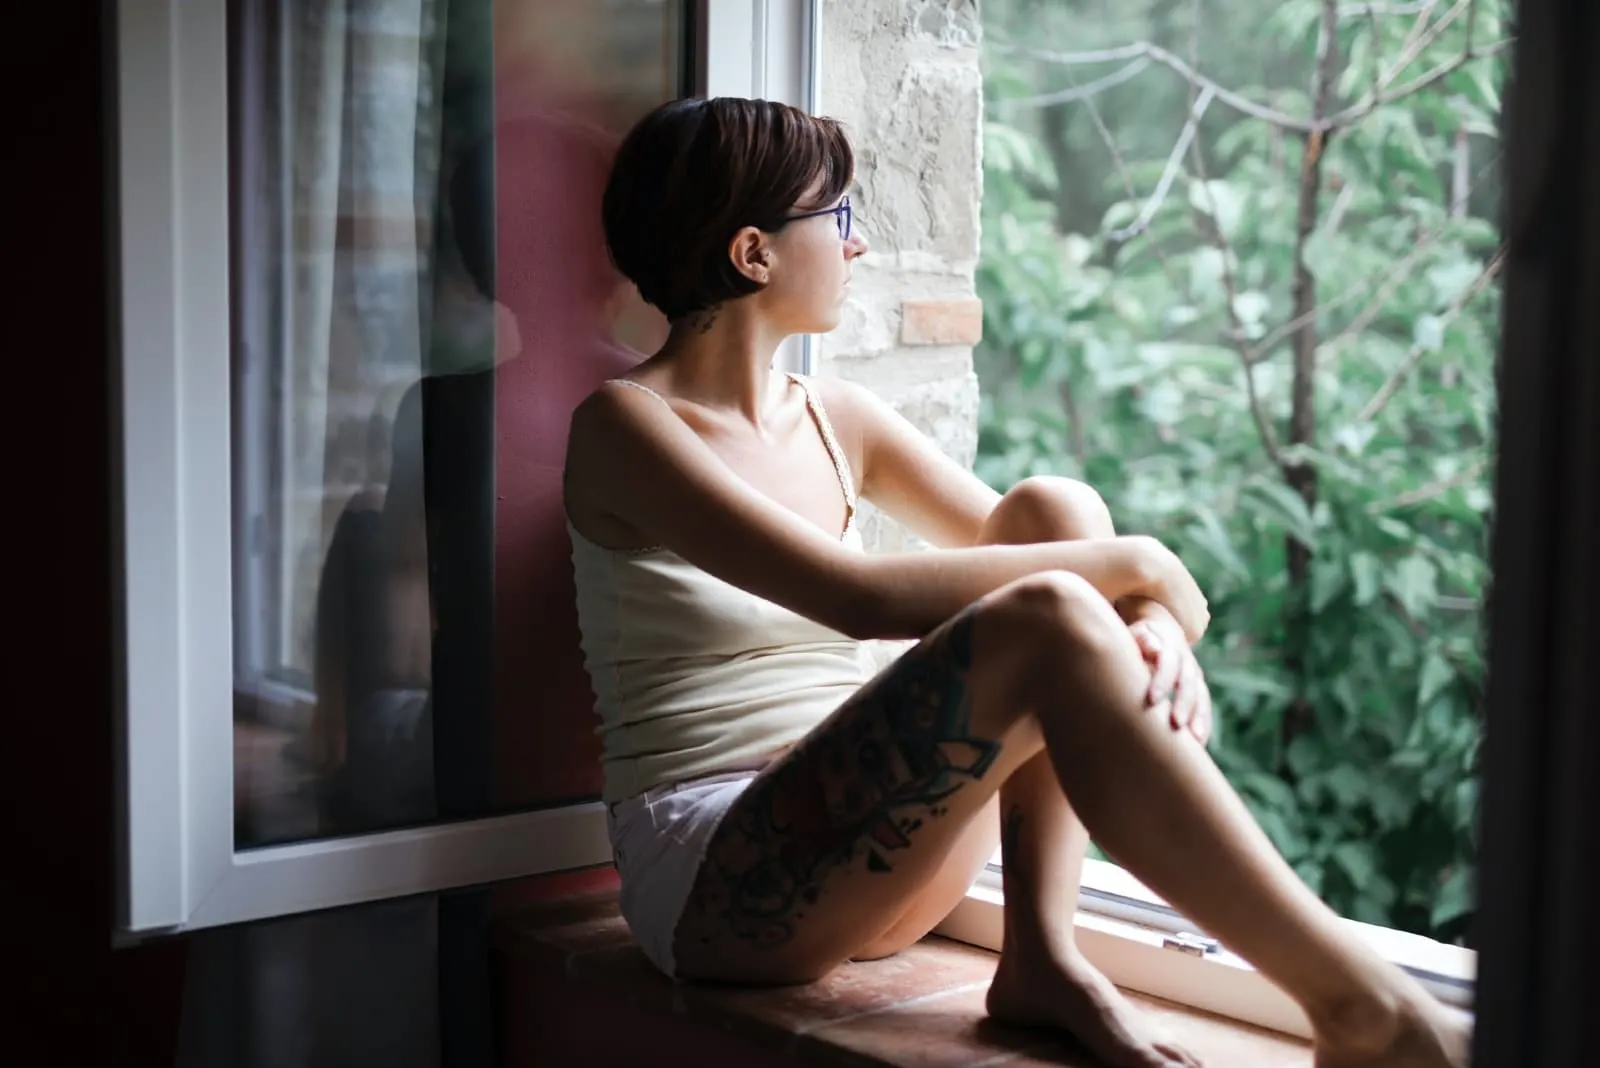 woman in white top sitting on window pane looking outside